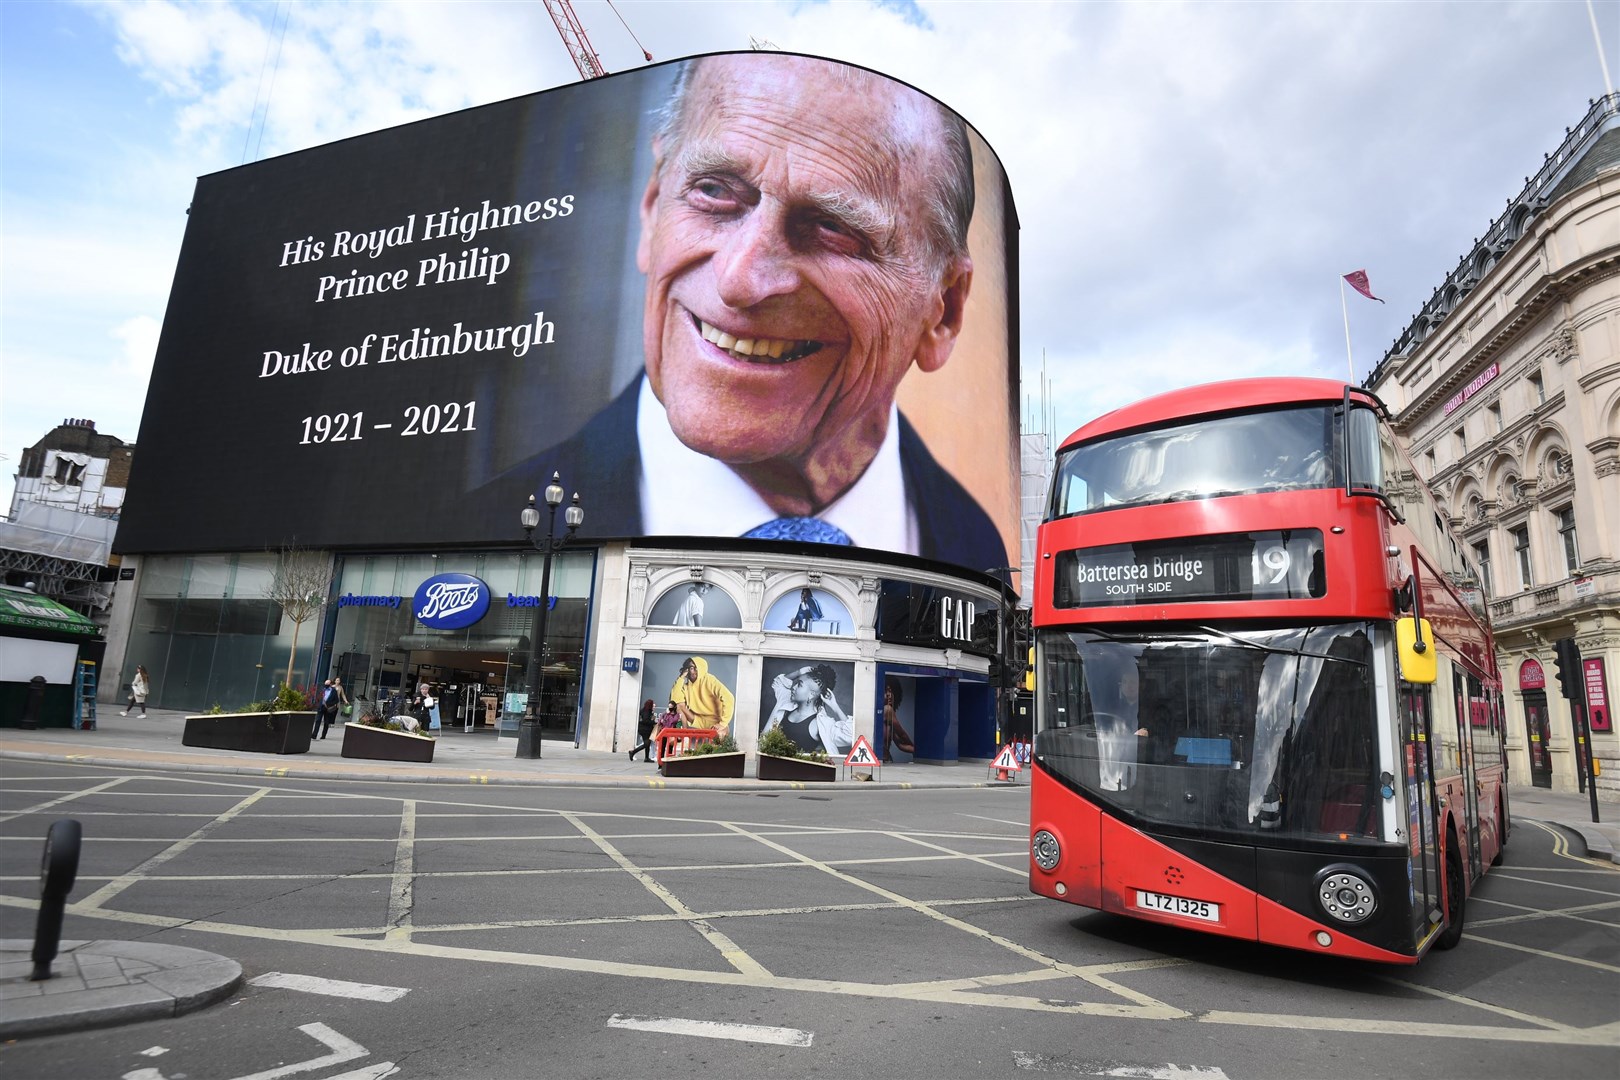 A tribute to the Duke of Edinburgh was featured at the Piccadilly Lights in central London (Kirsty O’Connor/PA)